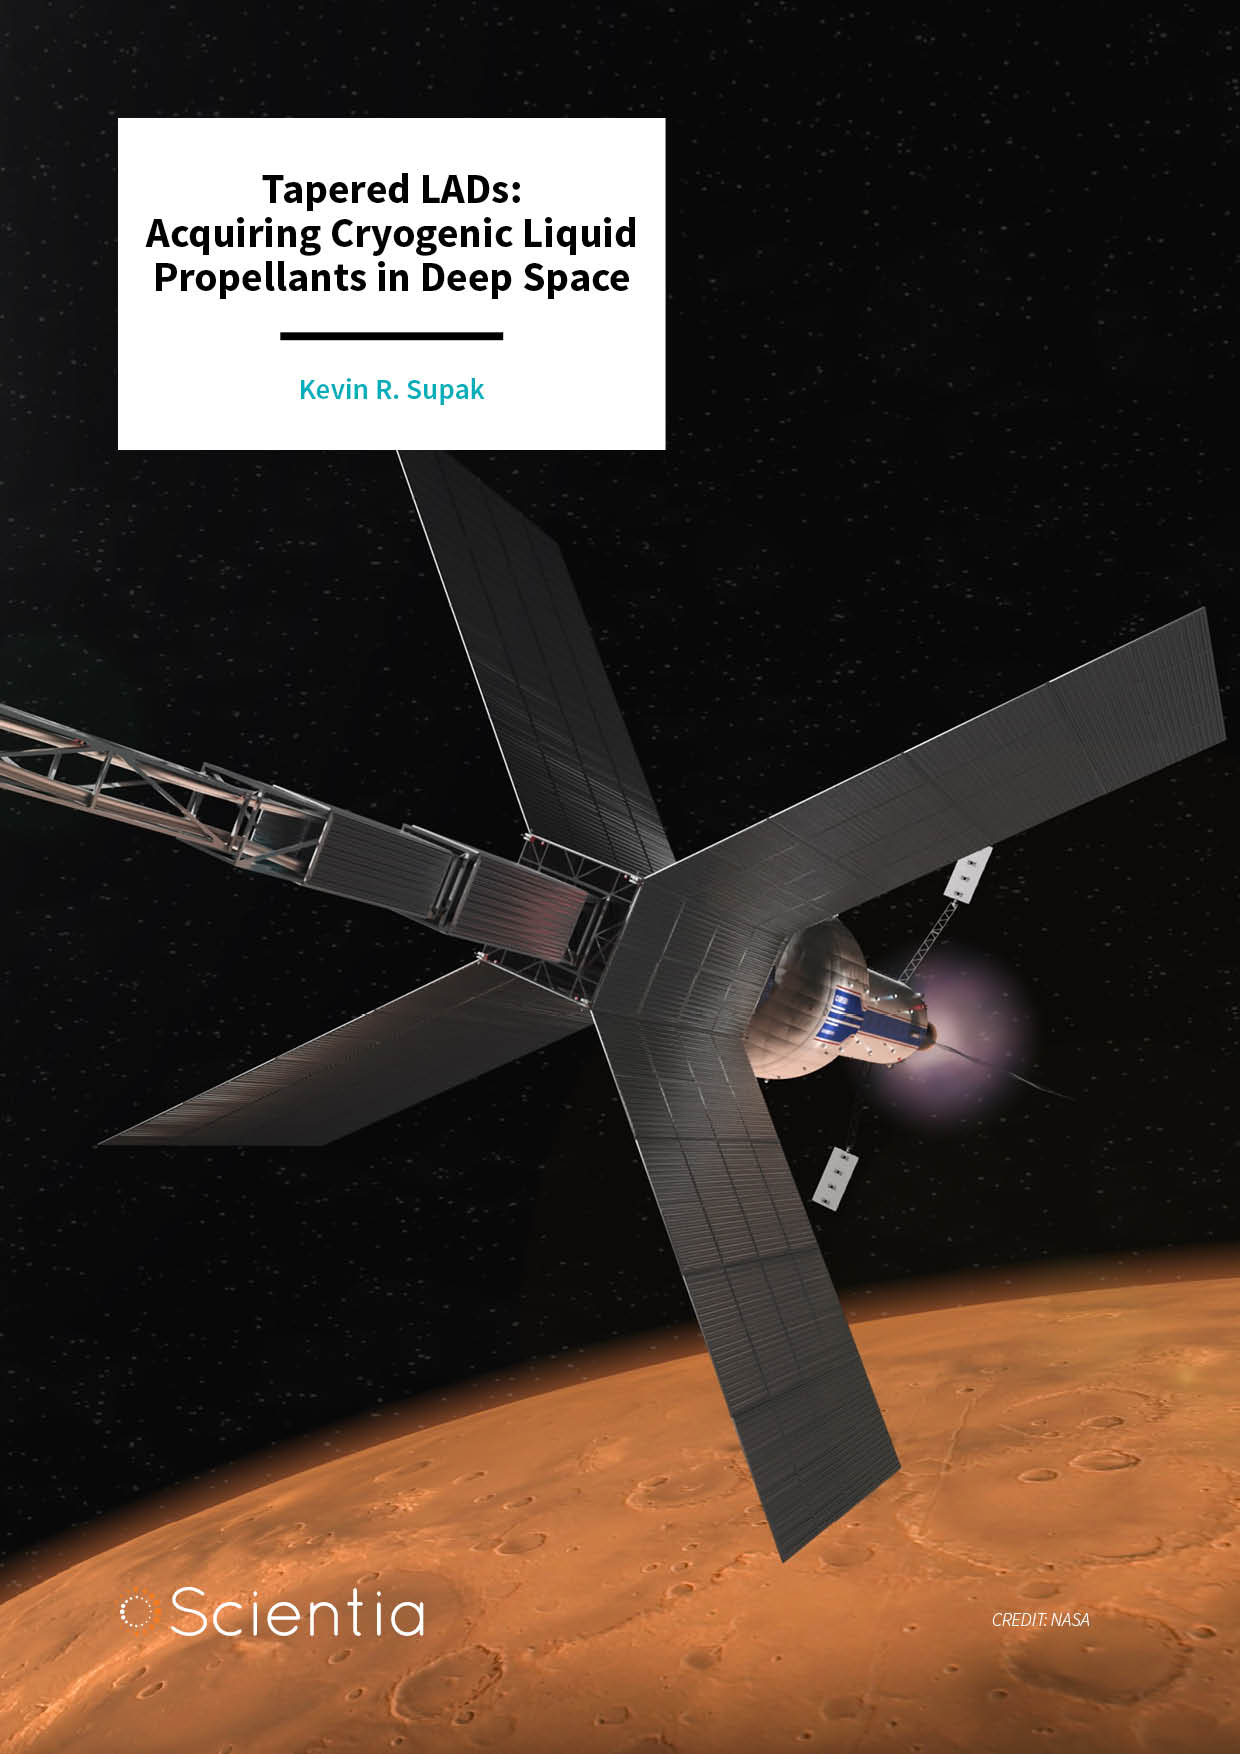 Kevin R. Supak | Tapered LADs: Acquiring Cryogenic Liquid Propellants in Deep Space